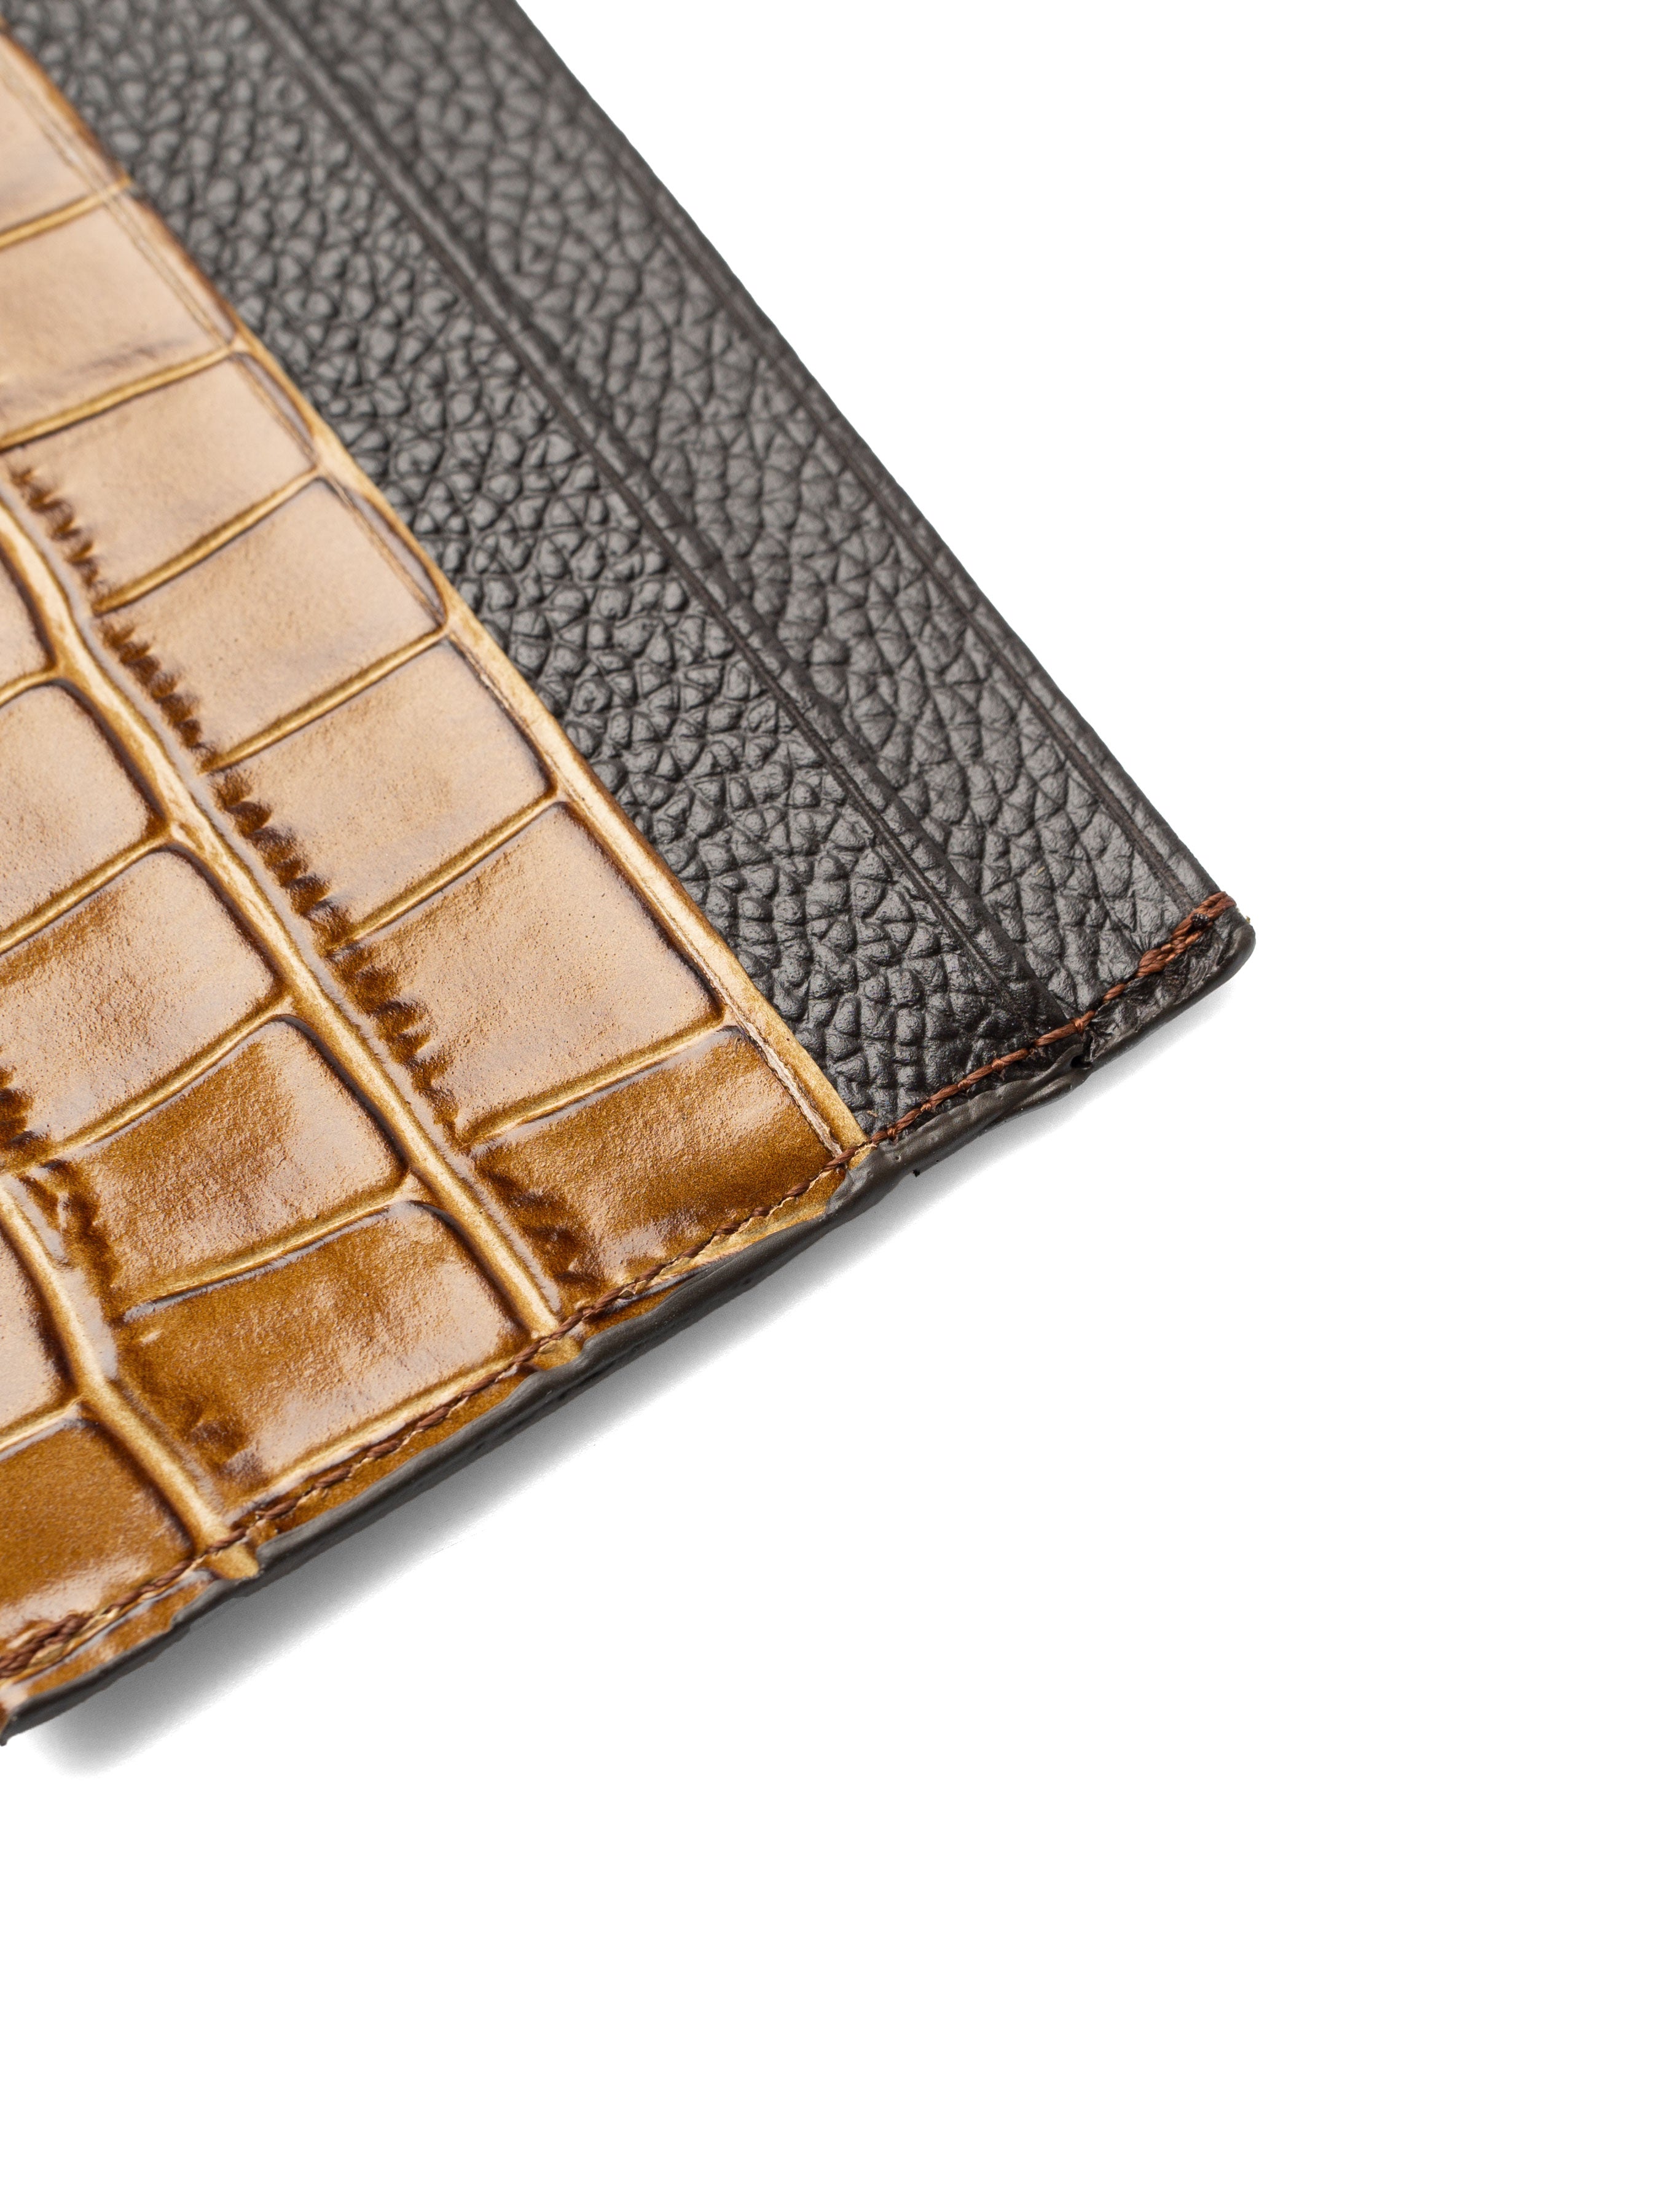 Card Holder - Brown Polished Croco Leather - Zeve Shoes